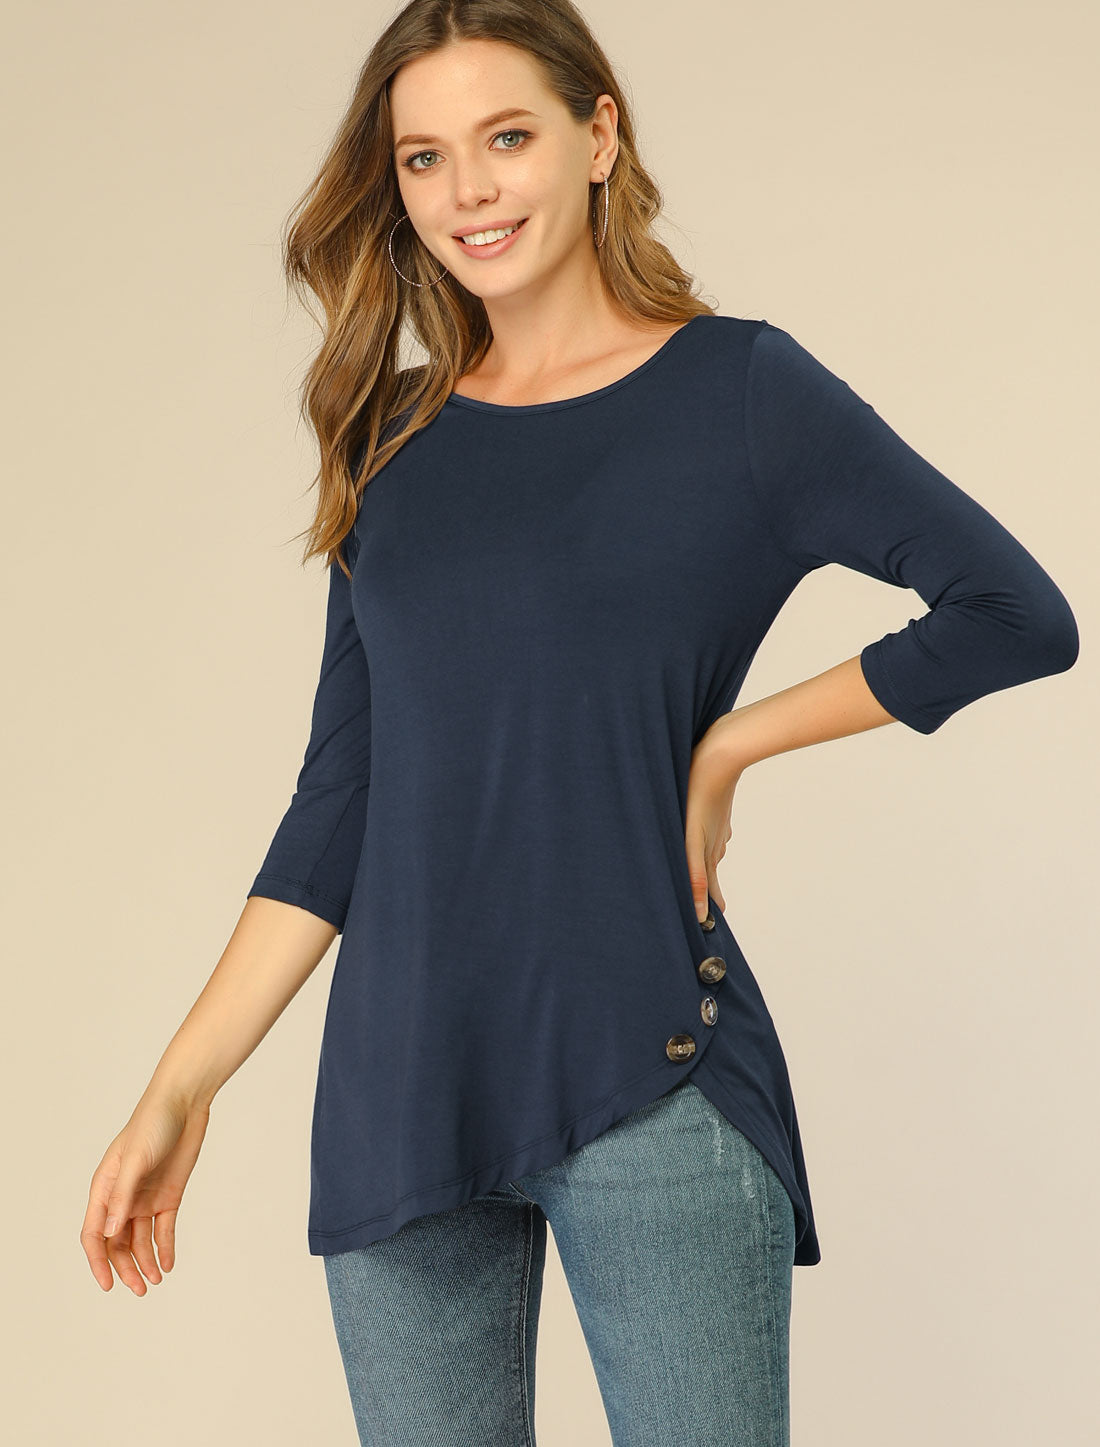 Allegra K 3/4 Sleeve Round Neck Button Decor Casual Stretchy Tunic Tops